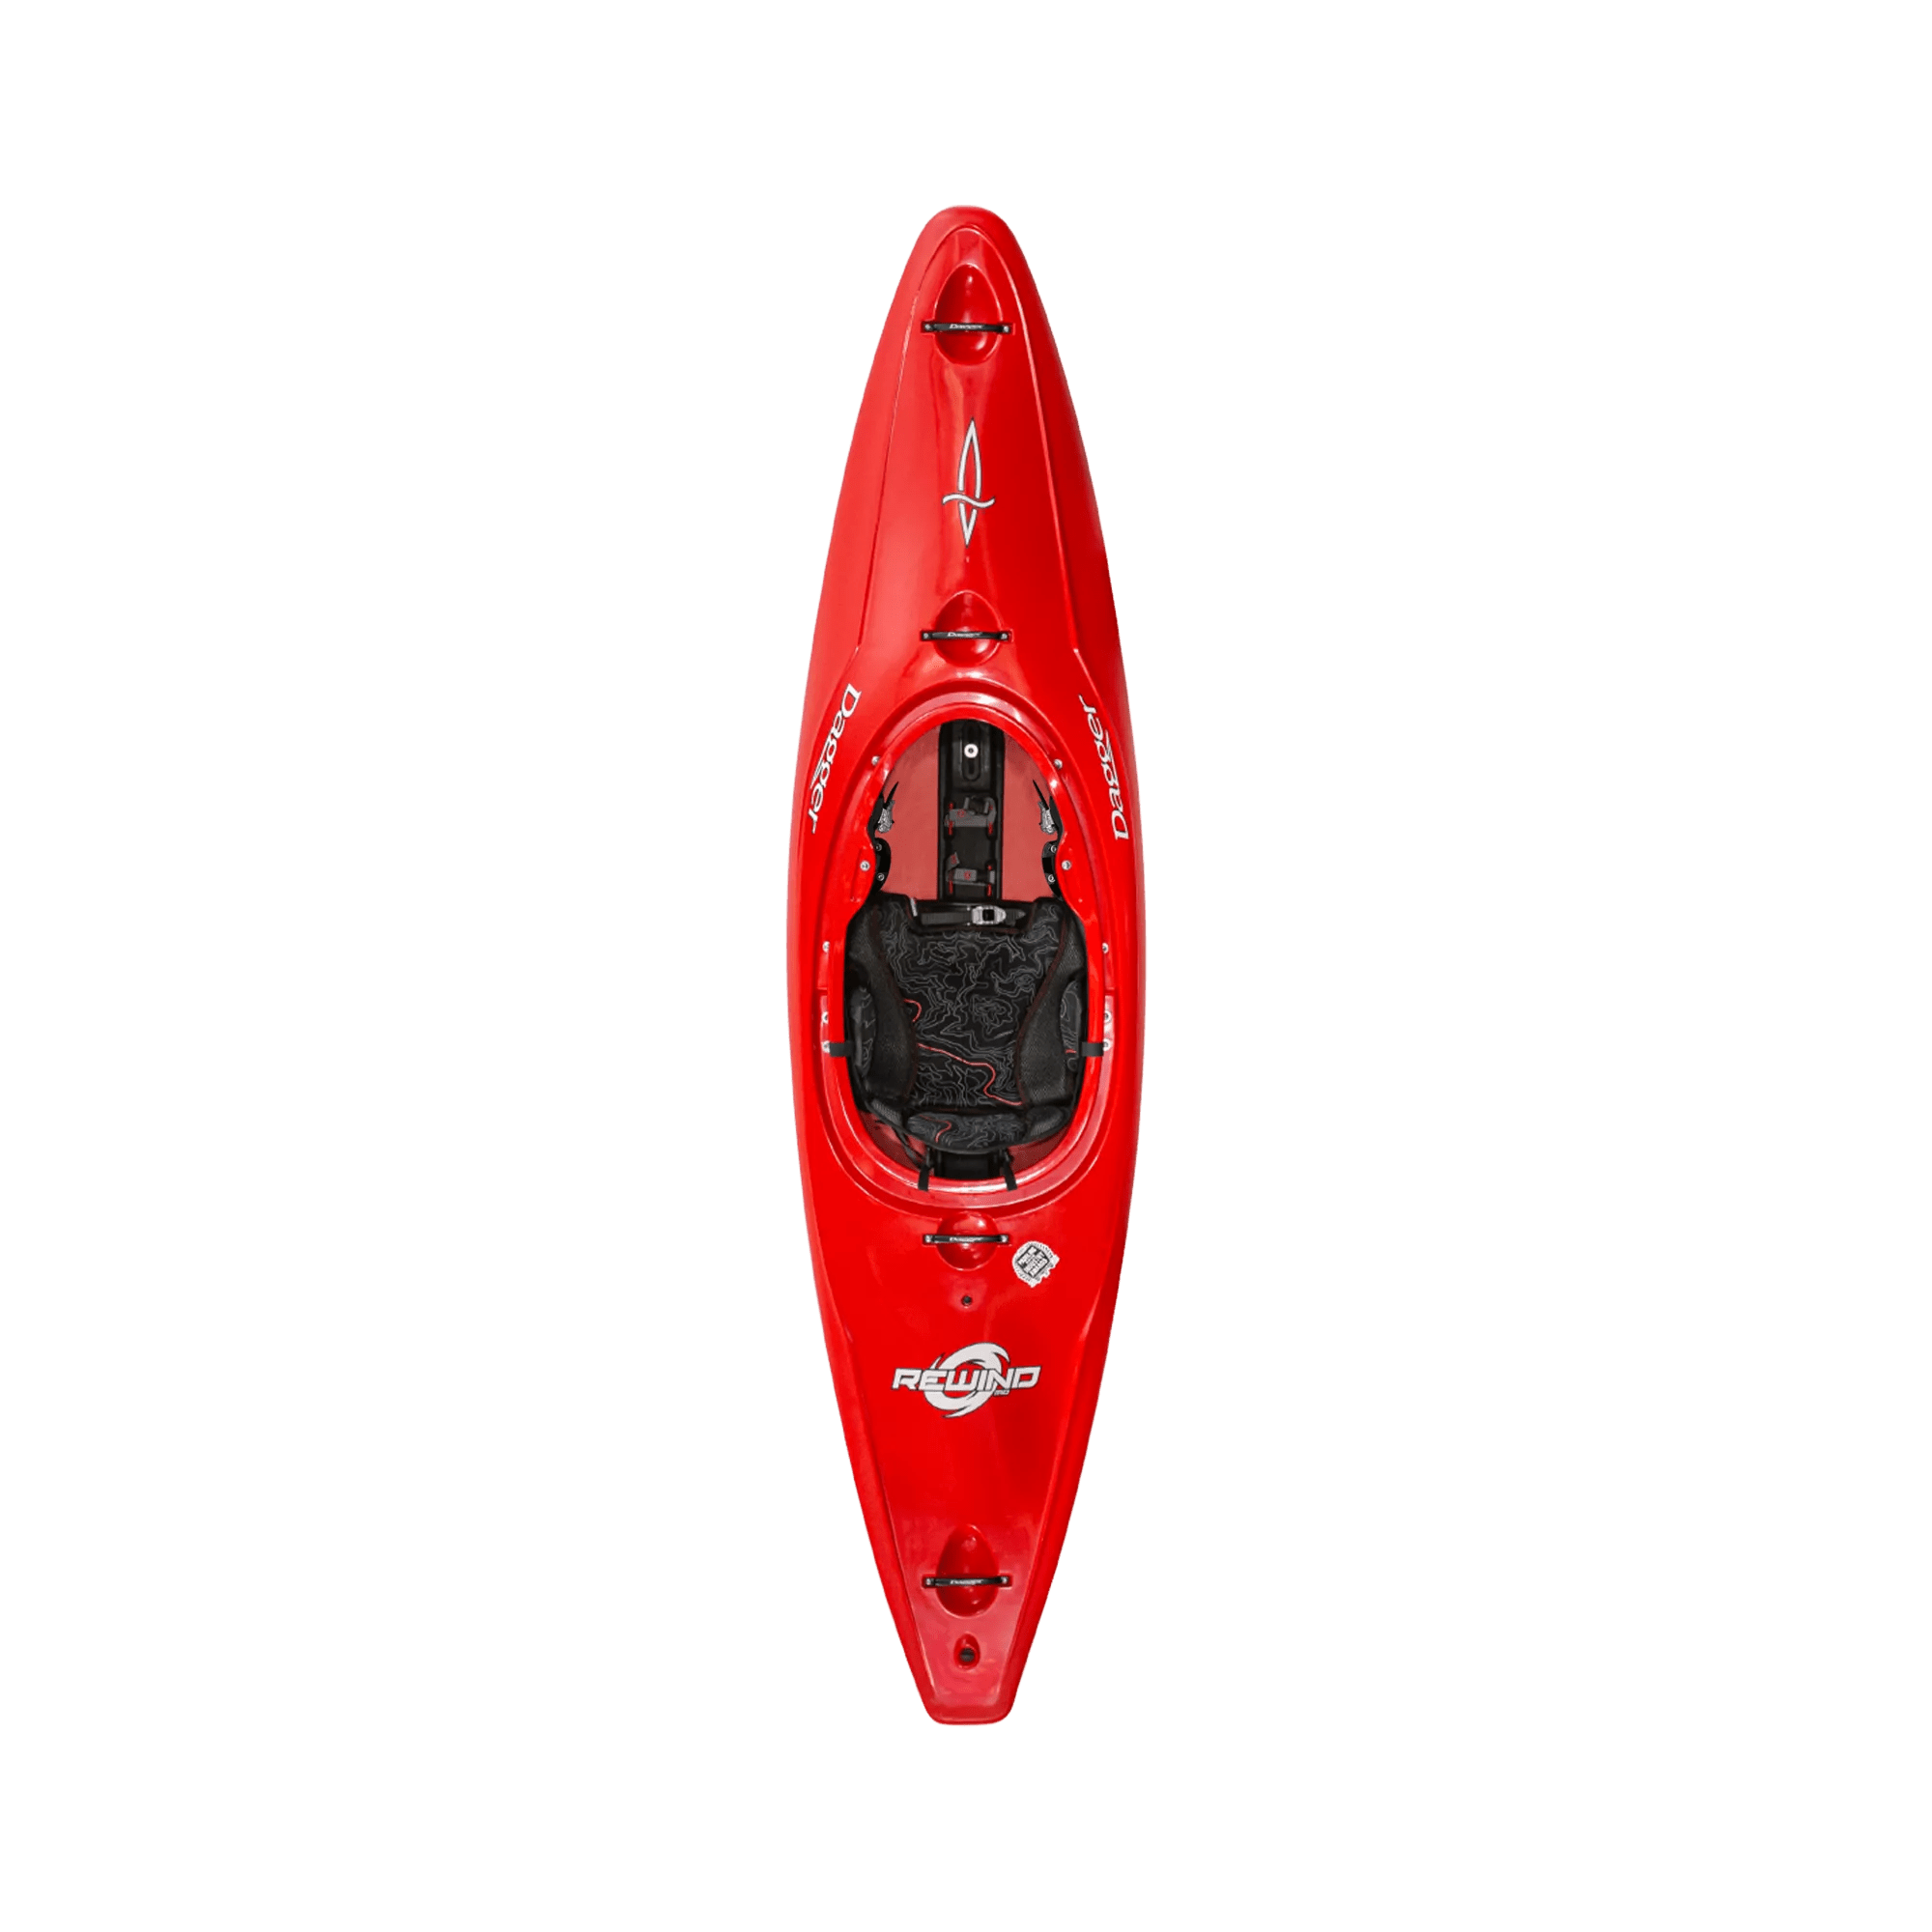 DAGGER - Rewind MD River Play Whitewater Kayak - Red - 9010340057 - TOP 